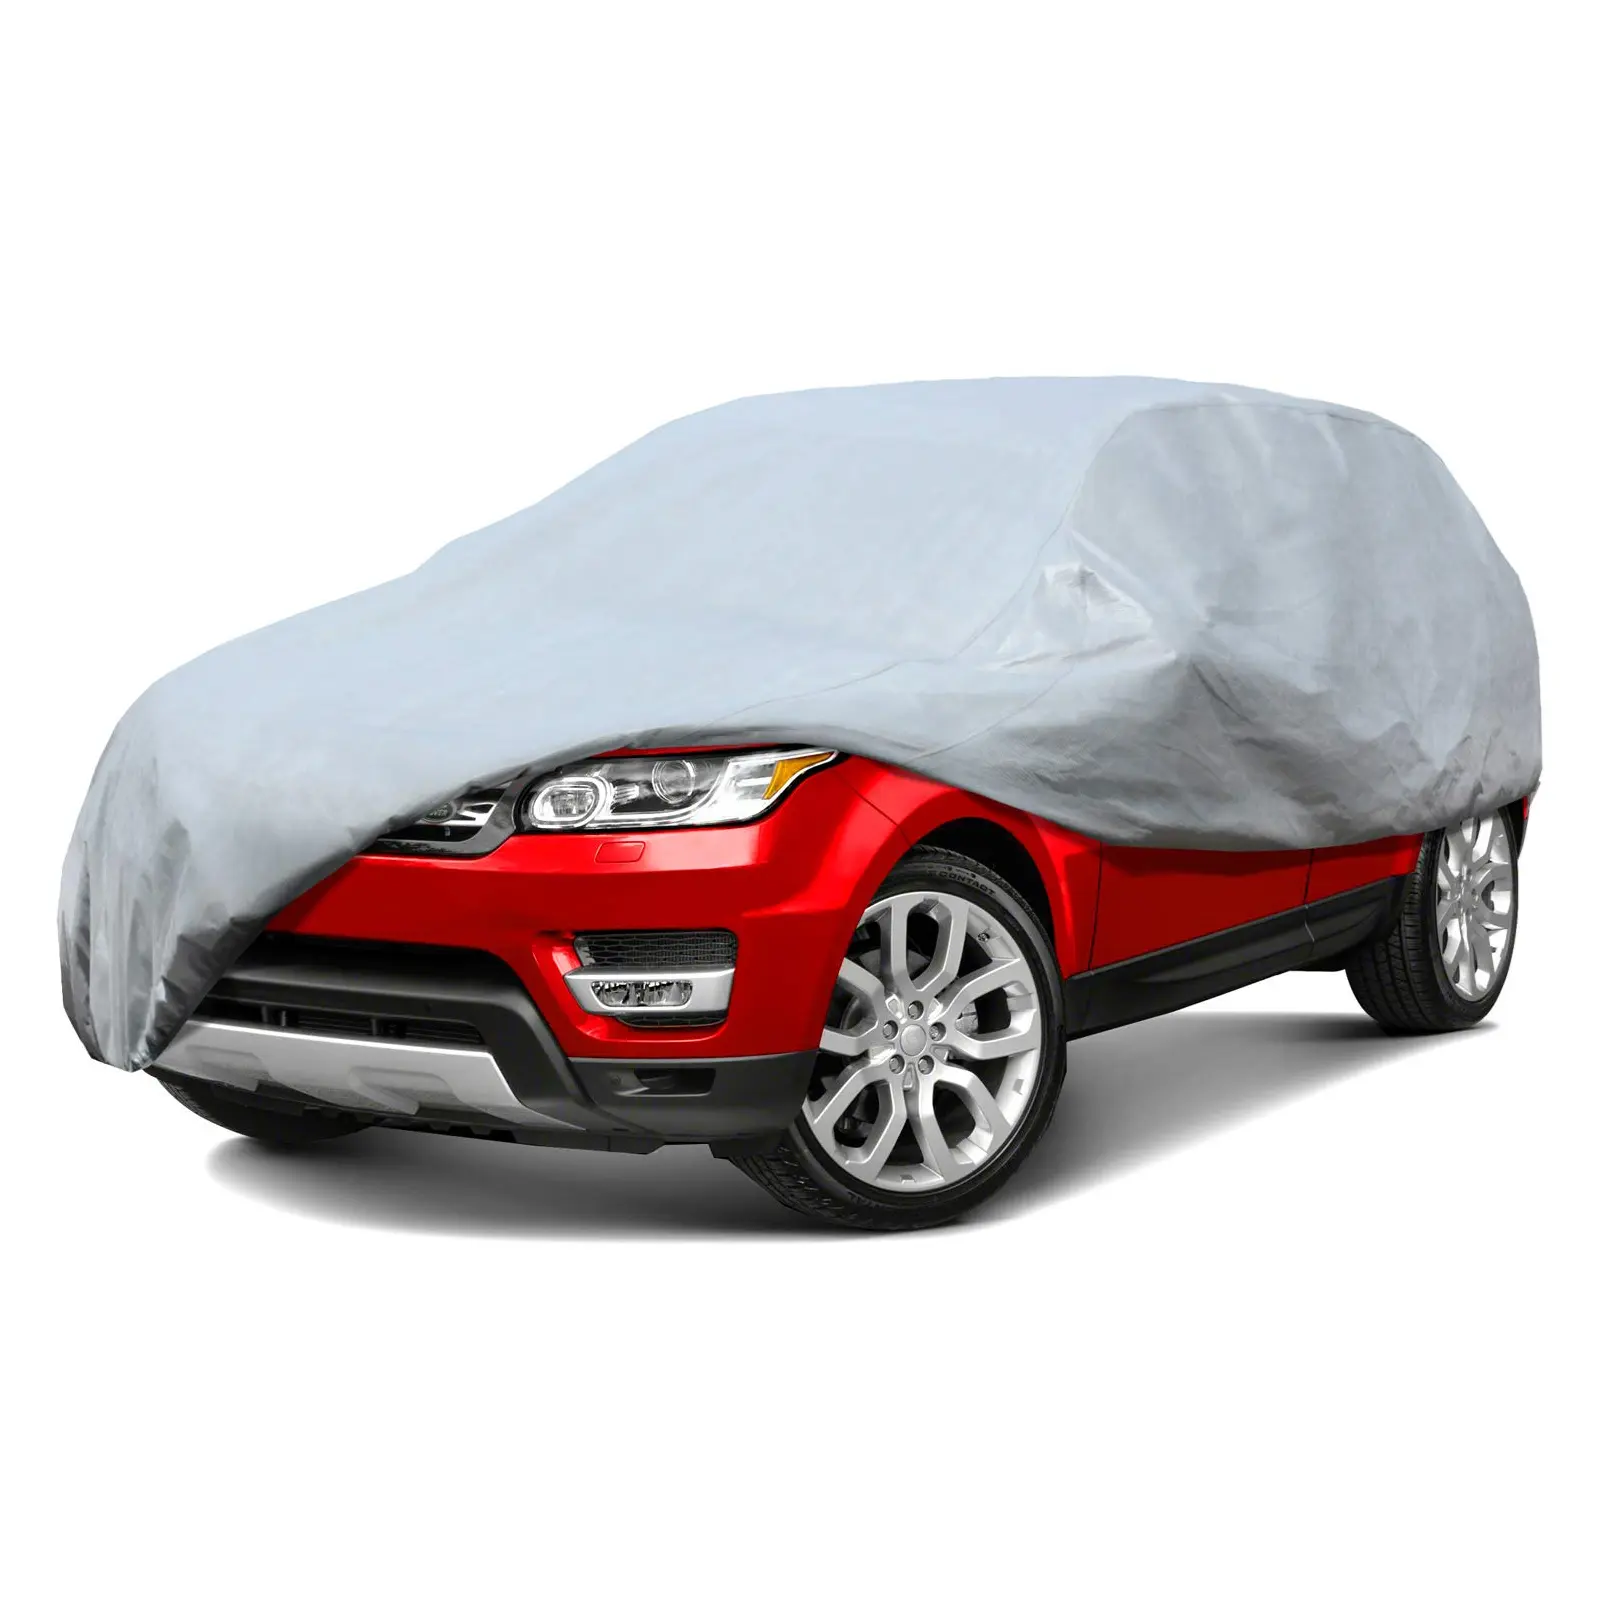 Car Cover Waterproof All Weather for Automobiles, Outdoor with Zipper Cotton, Universal Fit for SUV